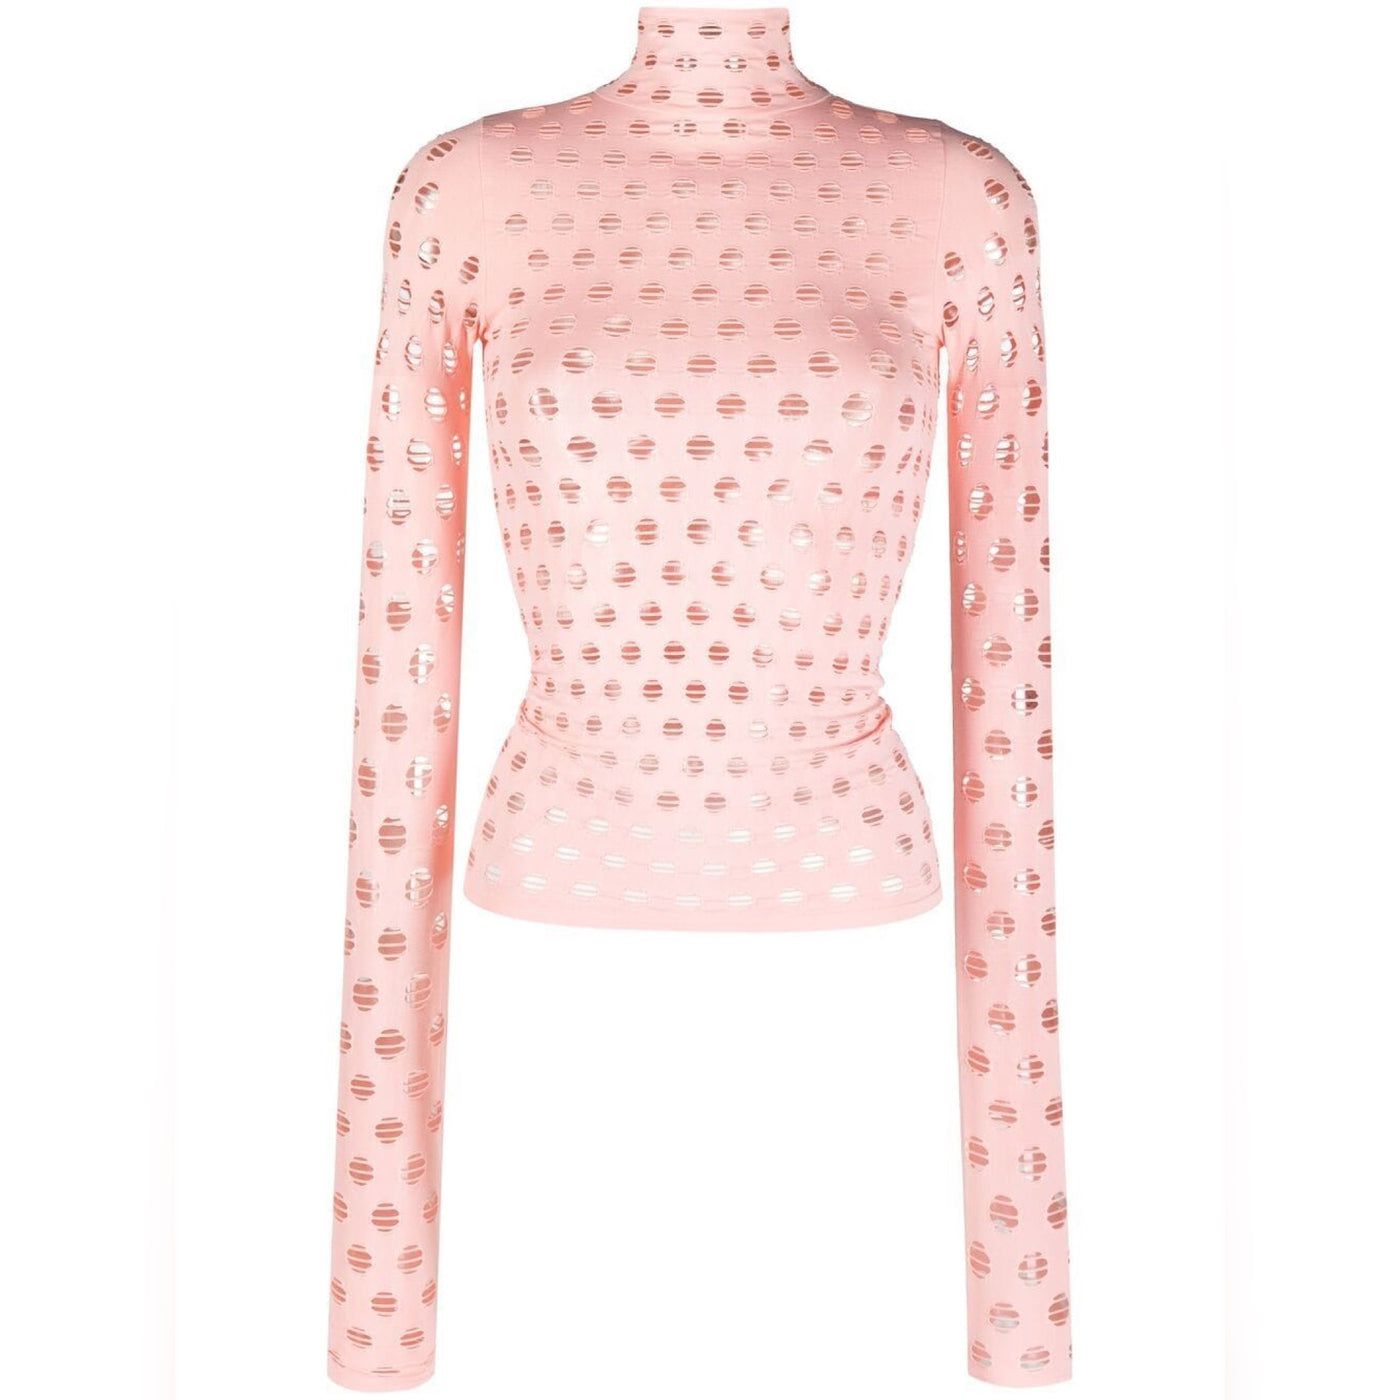 Maisie Wilen Perforated High-Neck Baby Pink Top